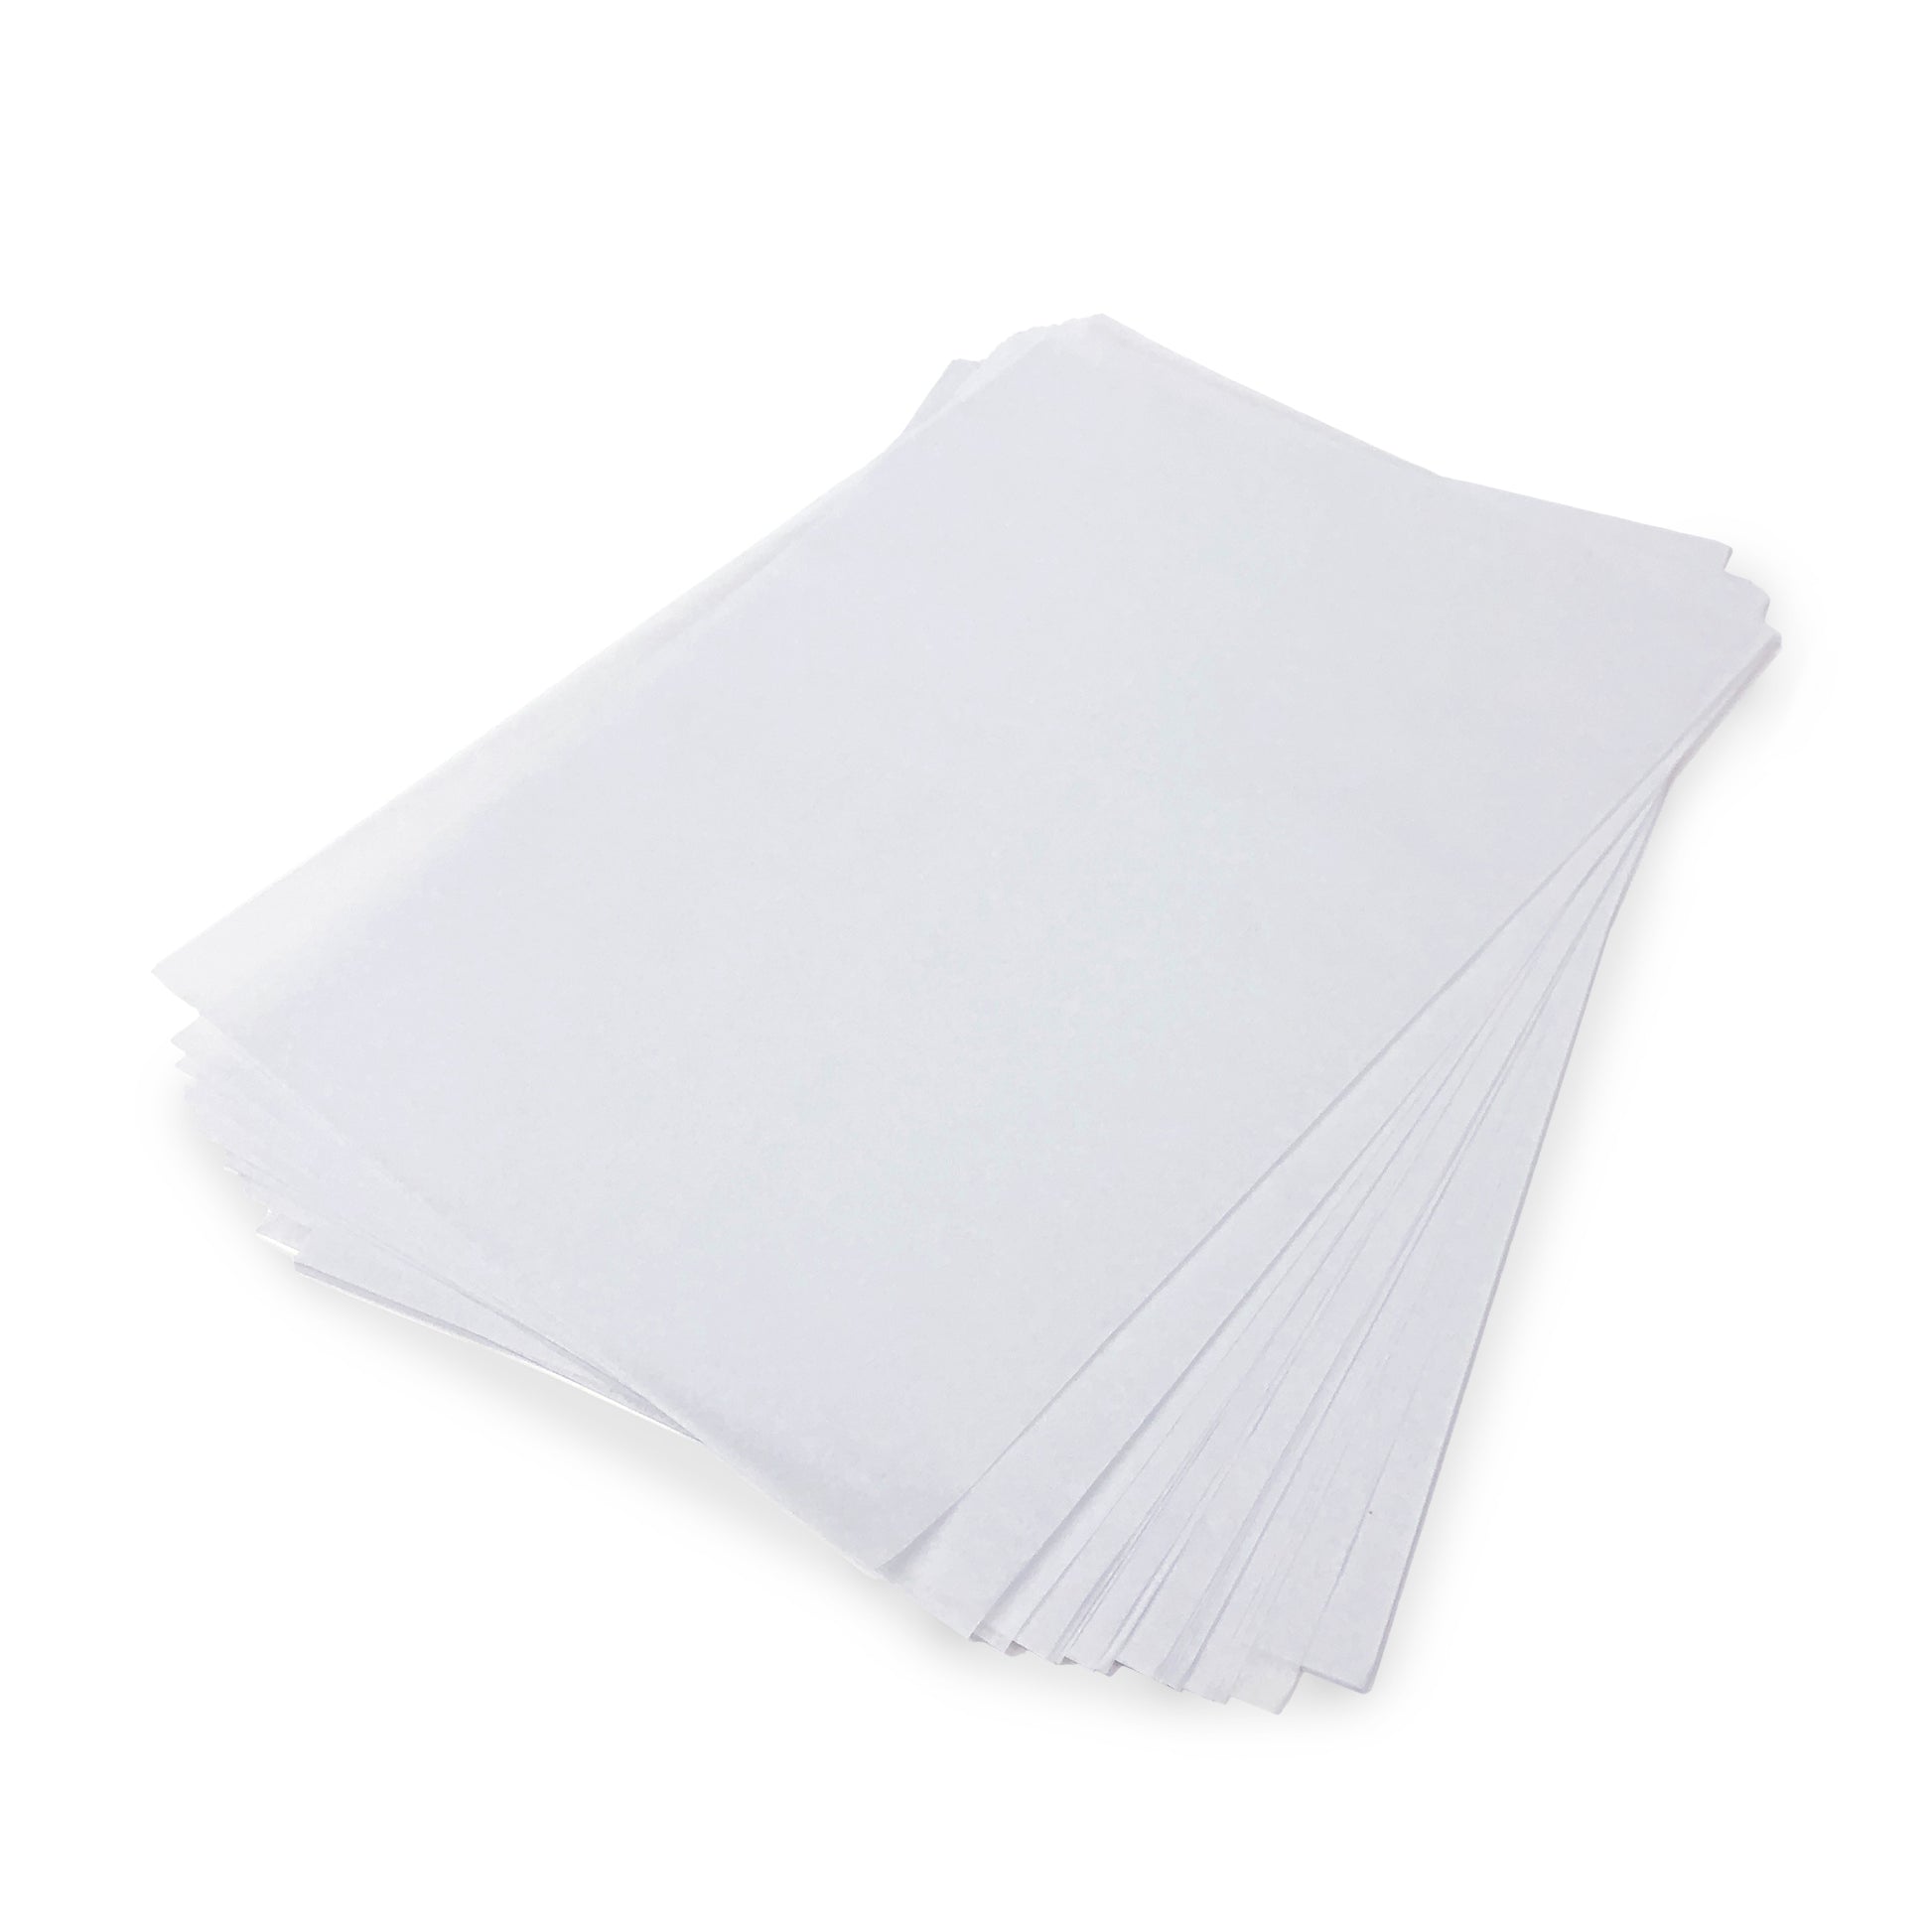 Lawson DTG/DTF Pre-Treat Curing Paper (Uncoated)